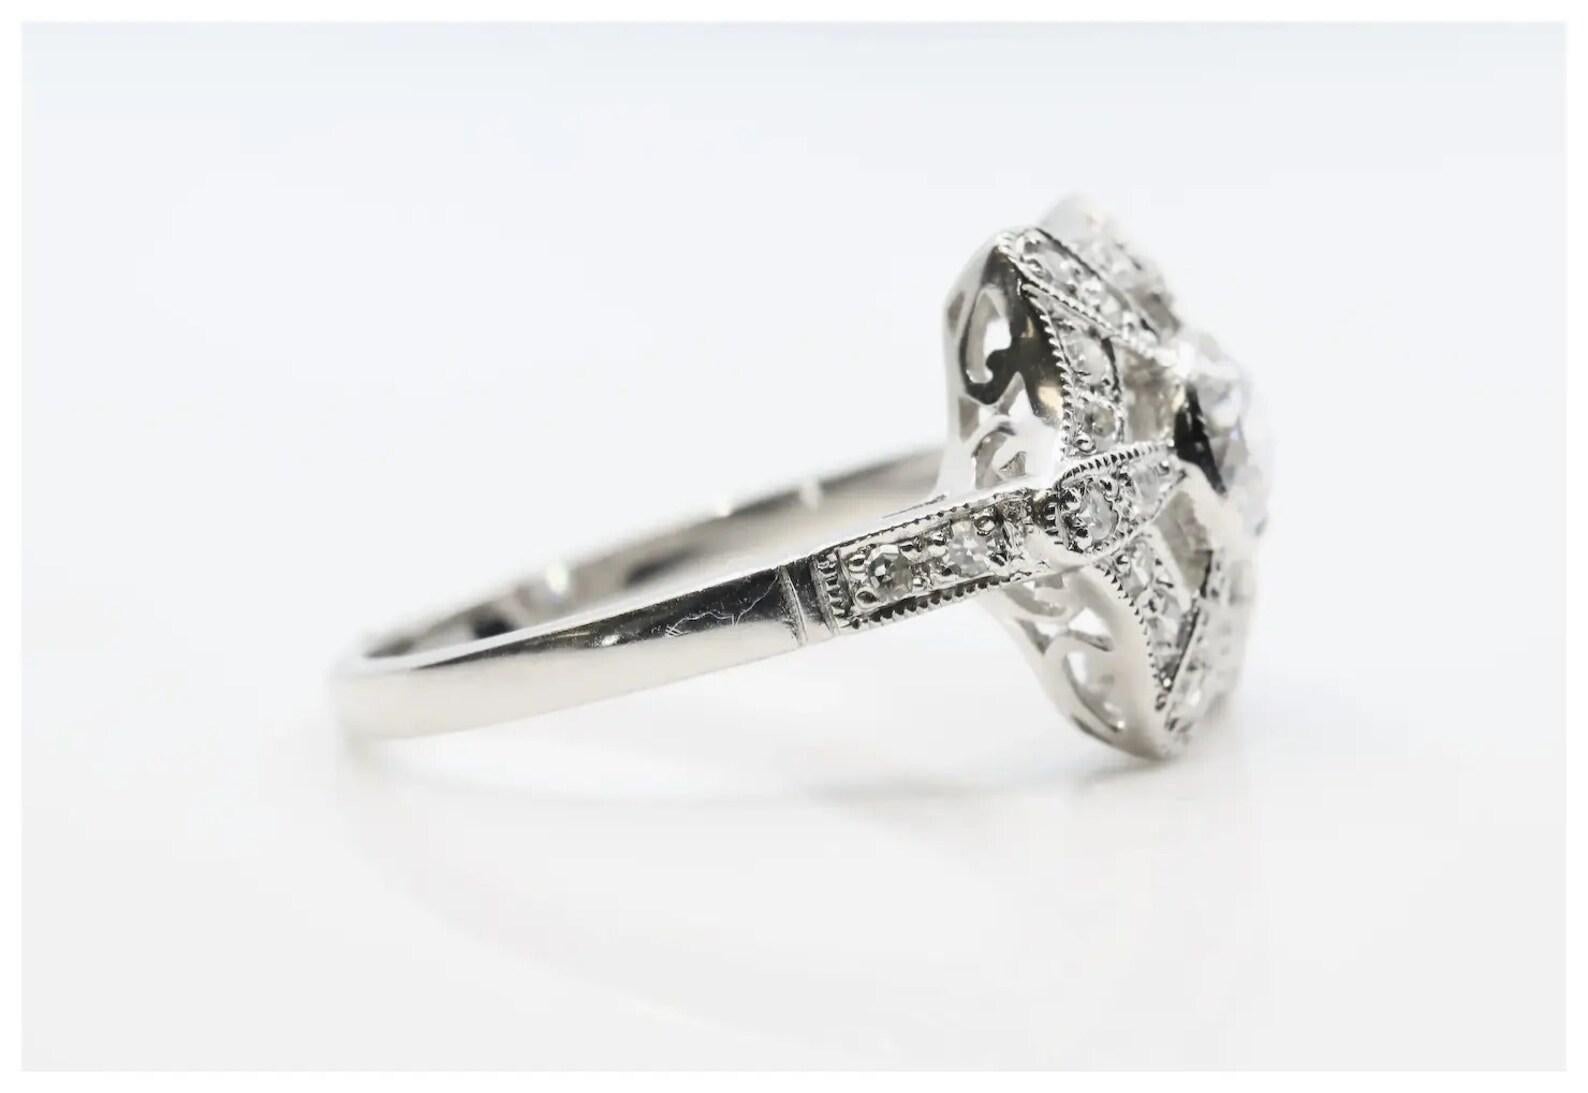 An Art Deco style diamond engagement ring in platinum.

Centered by a bezel set old European cut diamond of 0.55 carats having G color and VS2 clarity.

Accented by diamond set rays, and a halo of pave set diamonds with 28 accenting diamonds of